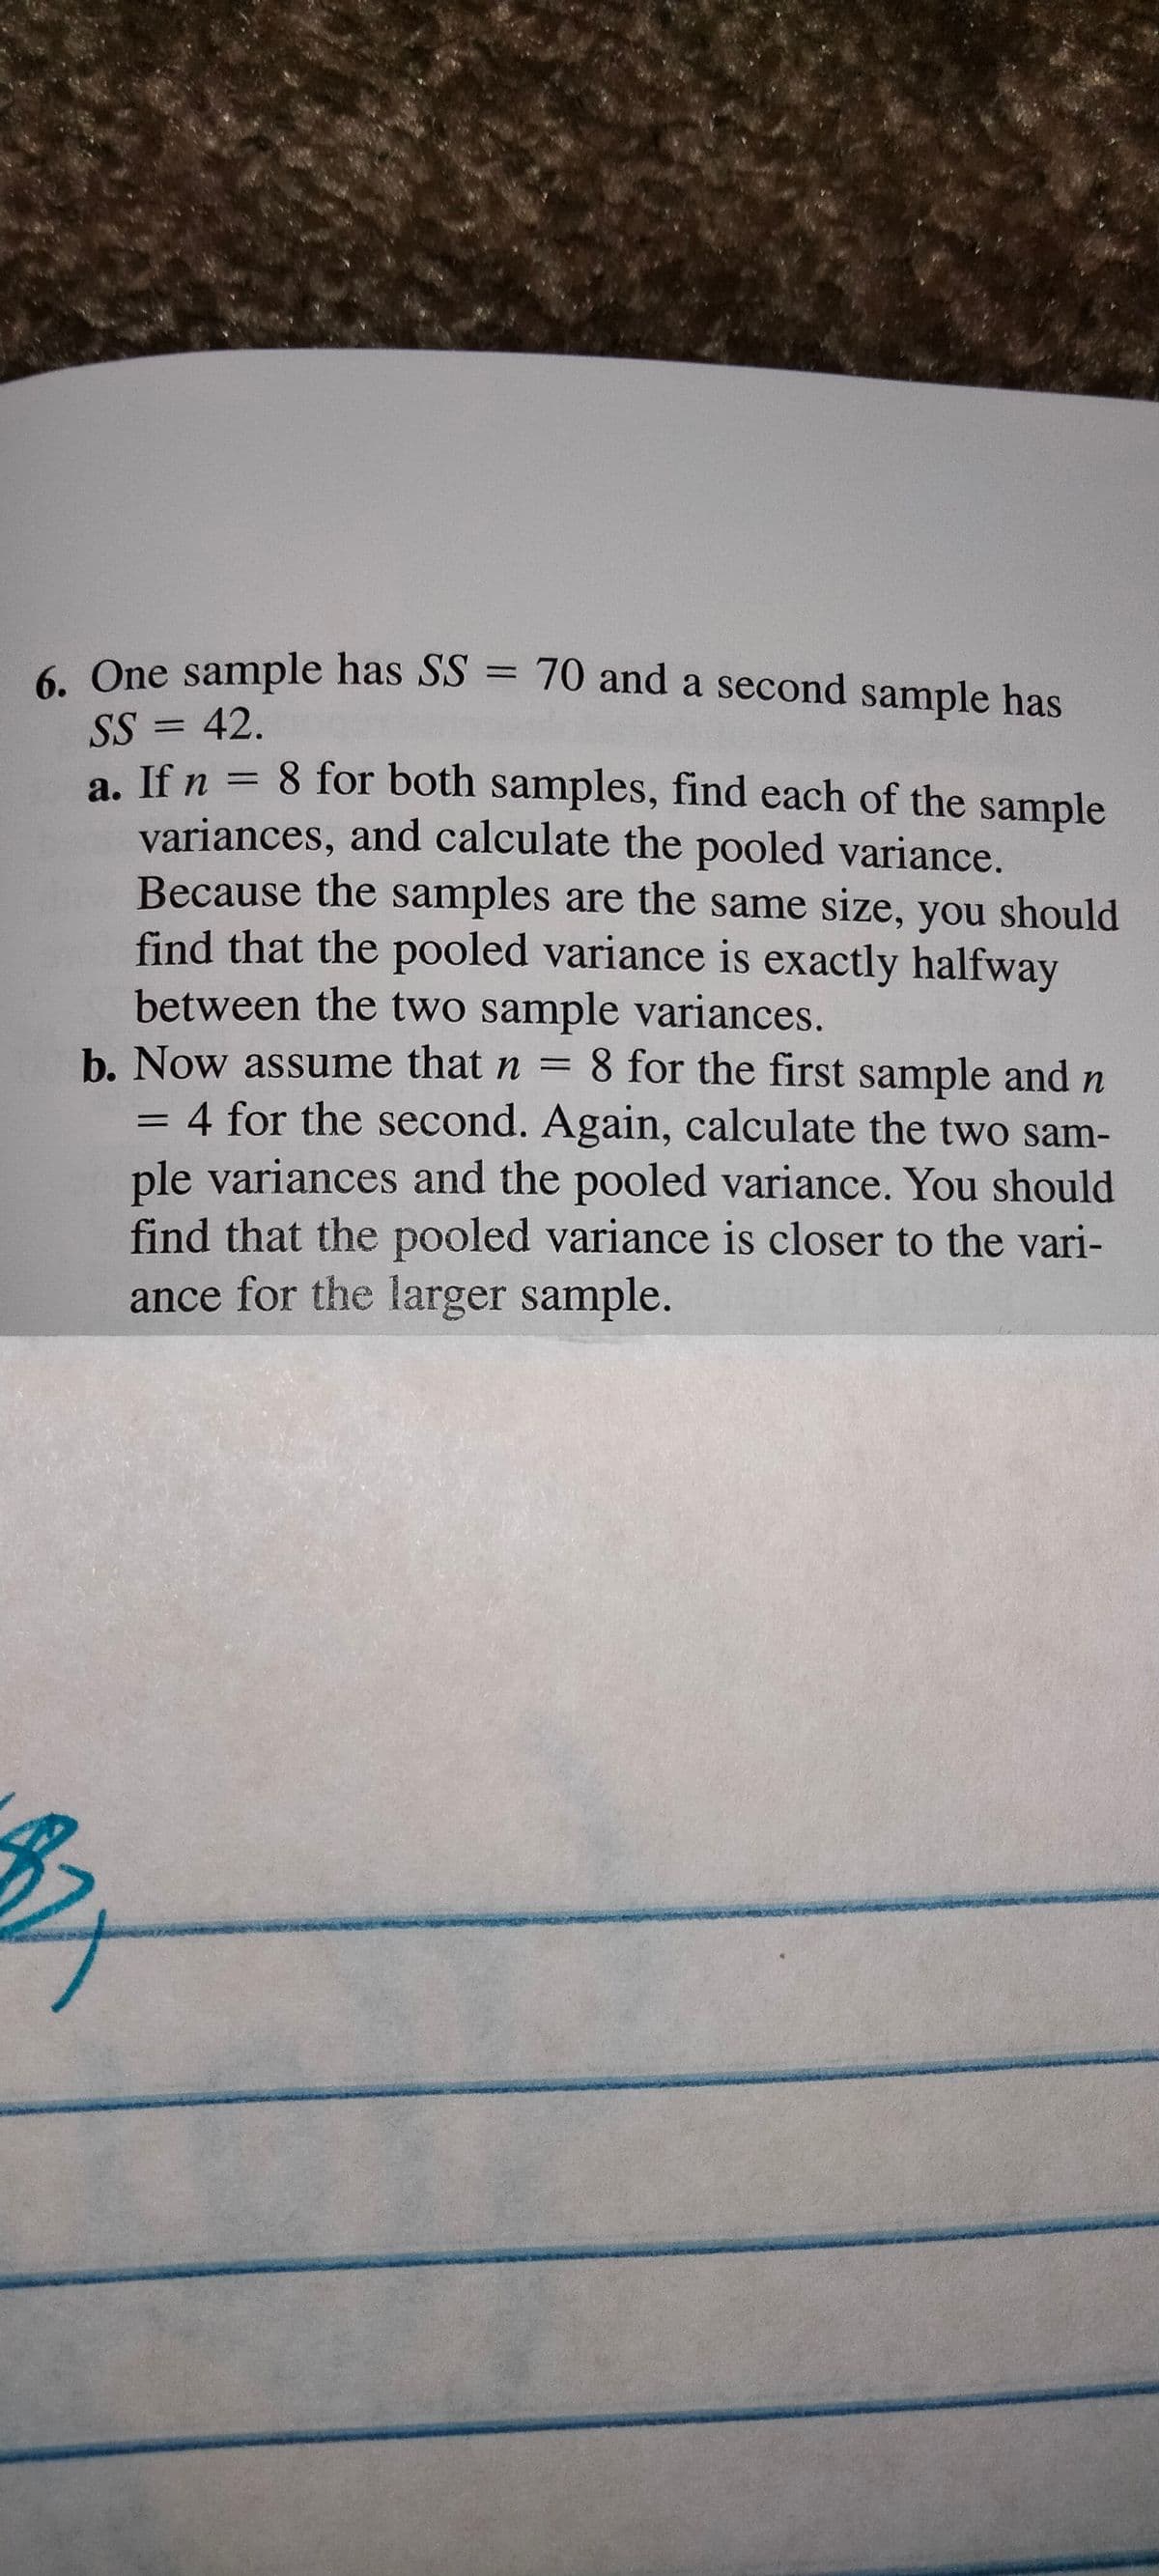 6. One sample has SS = 70 and a second sample has
%3D
SS = 42.
a. If n = 8 for both samples, find each of the sample
variances, and calculate the pooled variance.
Because the samples are the same size, you should
find that the pooled variance is exactly halfway
between the two sample variances.
b. Now assume that n = 8 for the first sample and n
4 for the second. Again, calculate the two sam-
ple variances and the pooled variance. You should
find that the pooled variance is closer to the vari-
ance for the larger sample.
%3D
